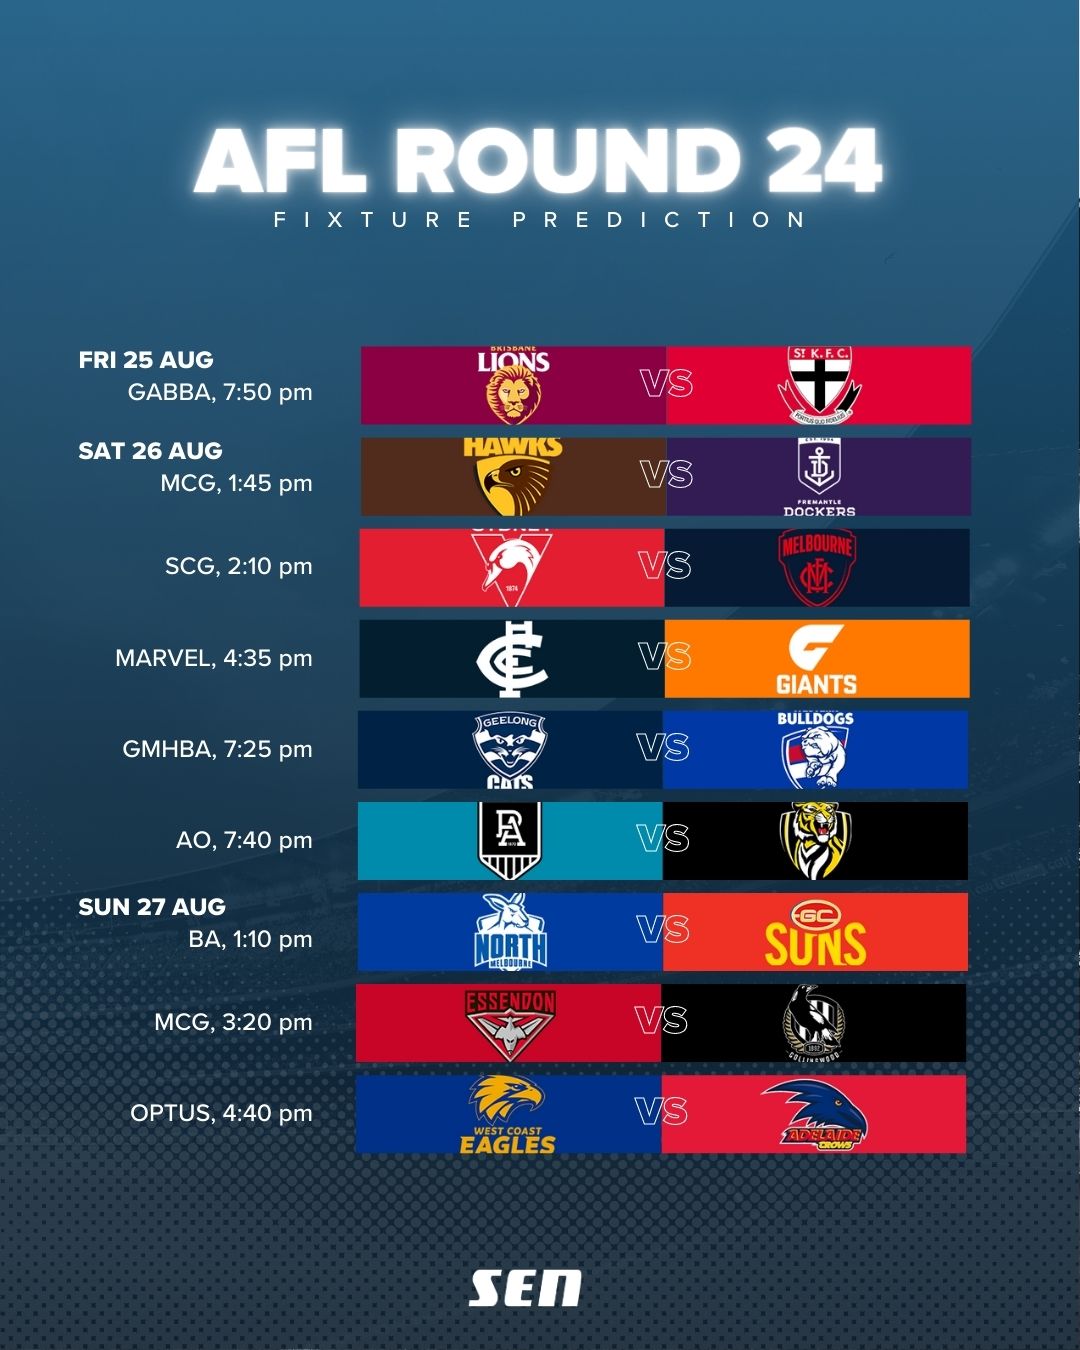 Predicting how the final fixture for Round 24 will play out